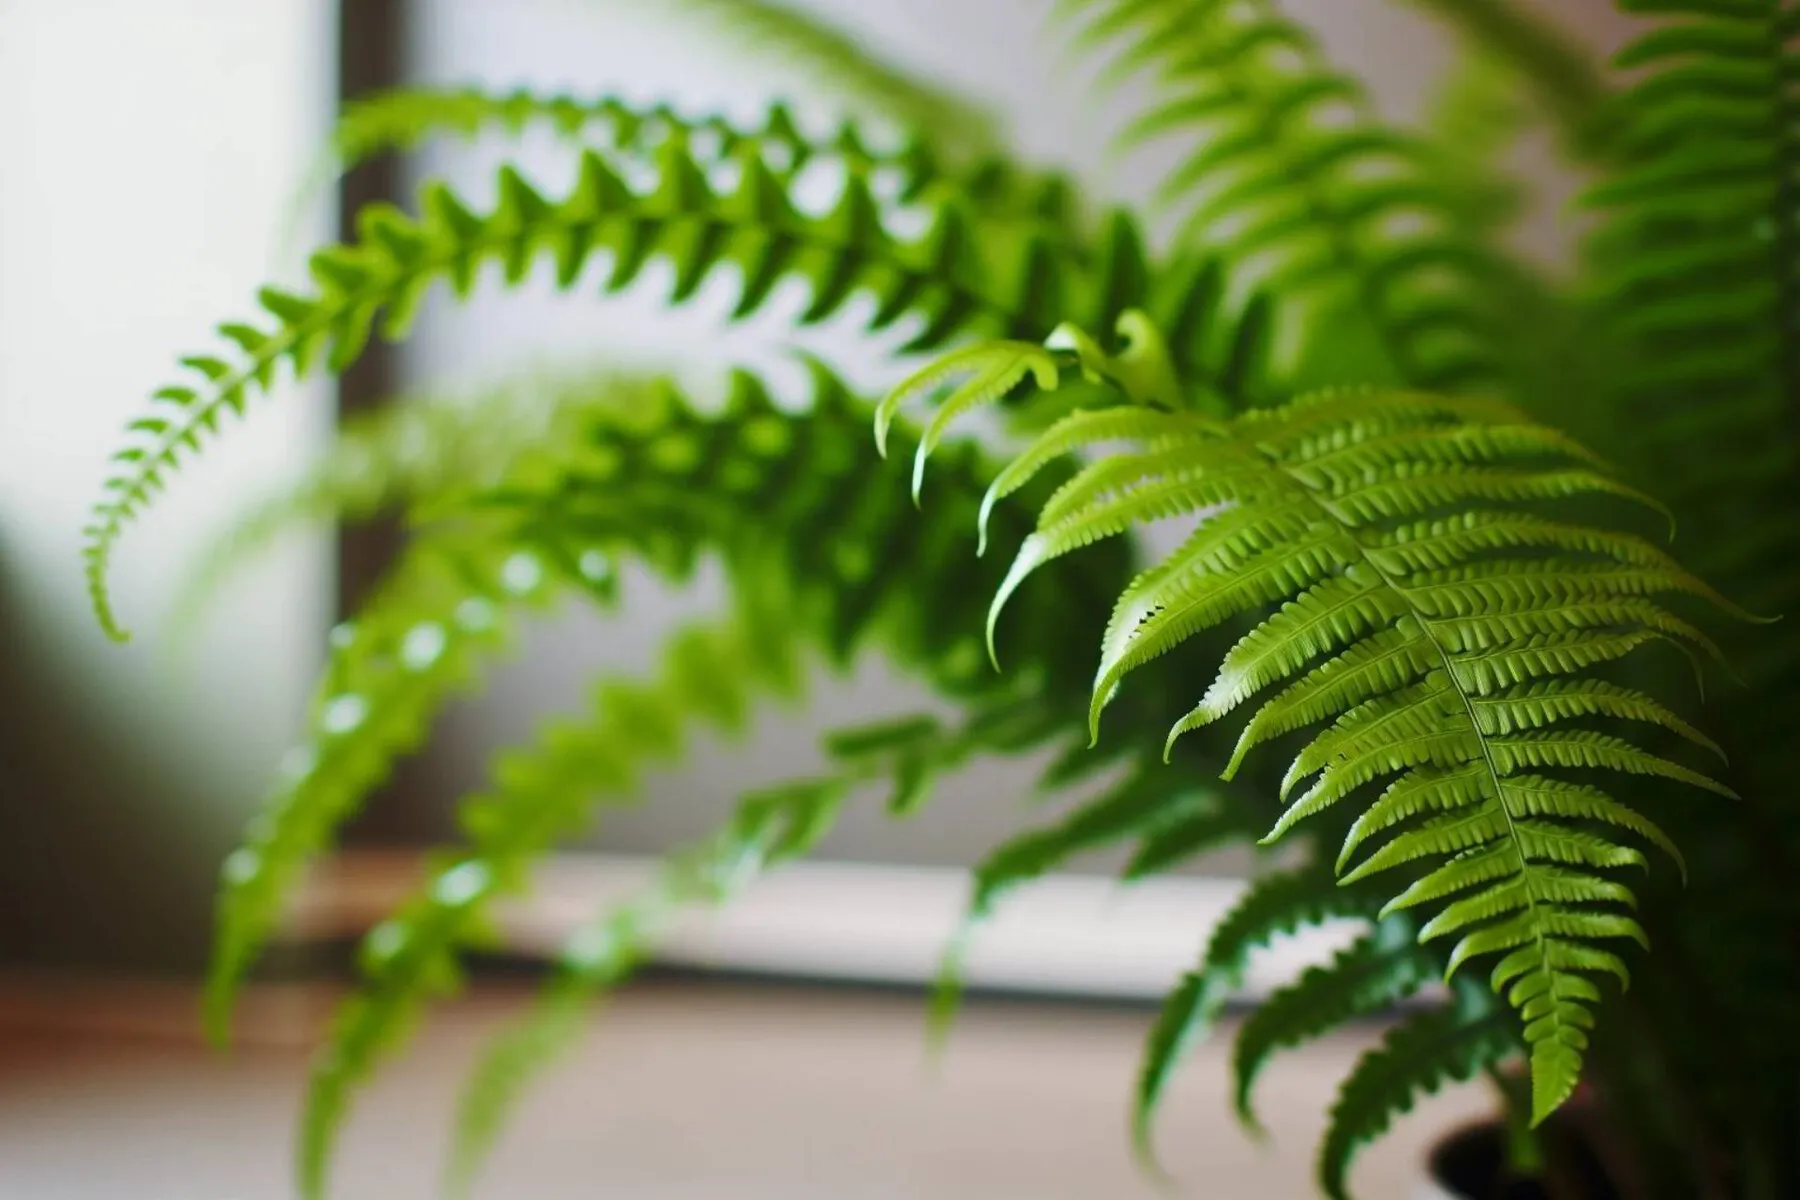 Lush Boston fern in a high-humidity environment